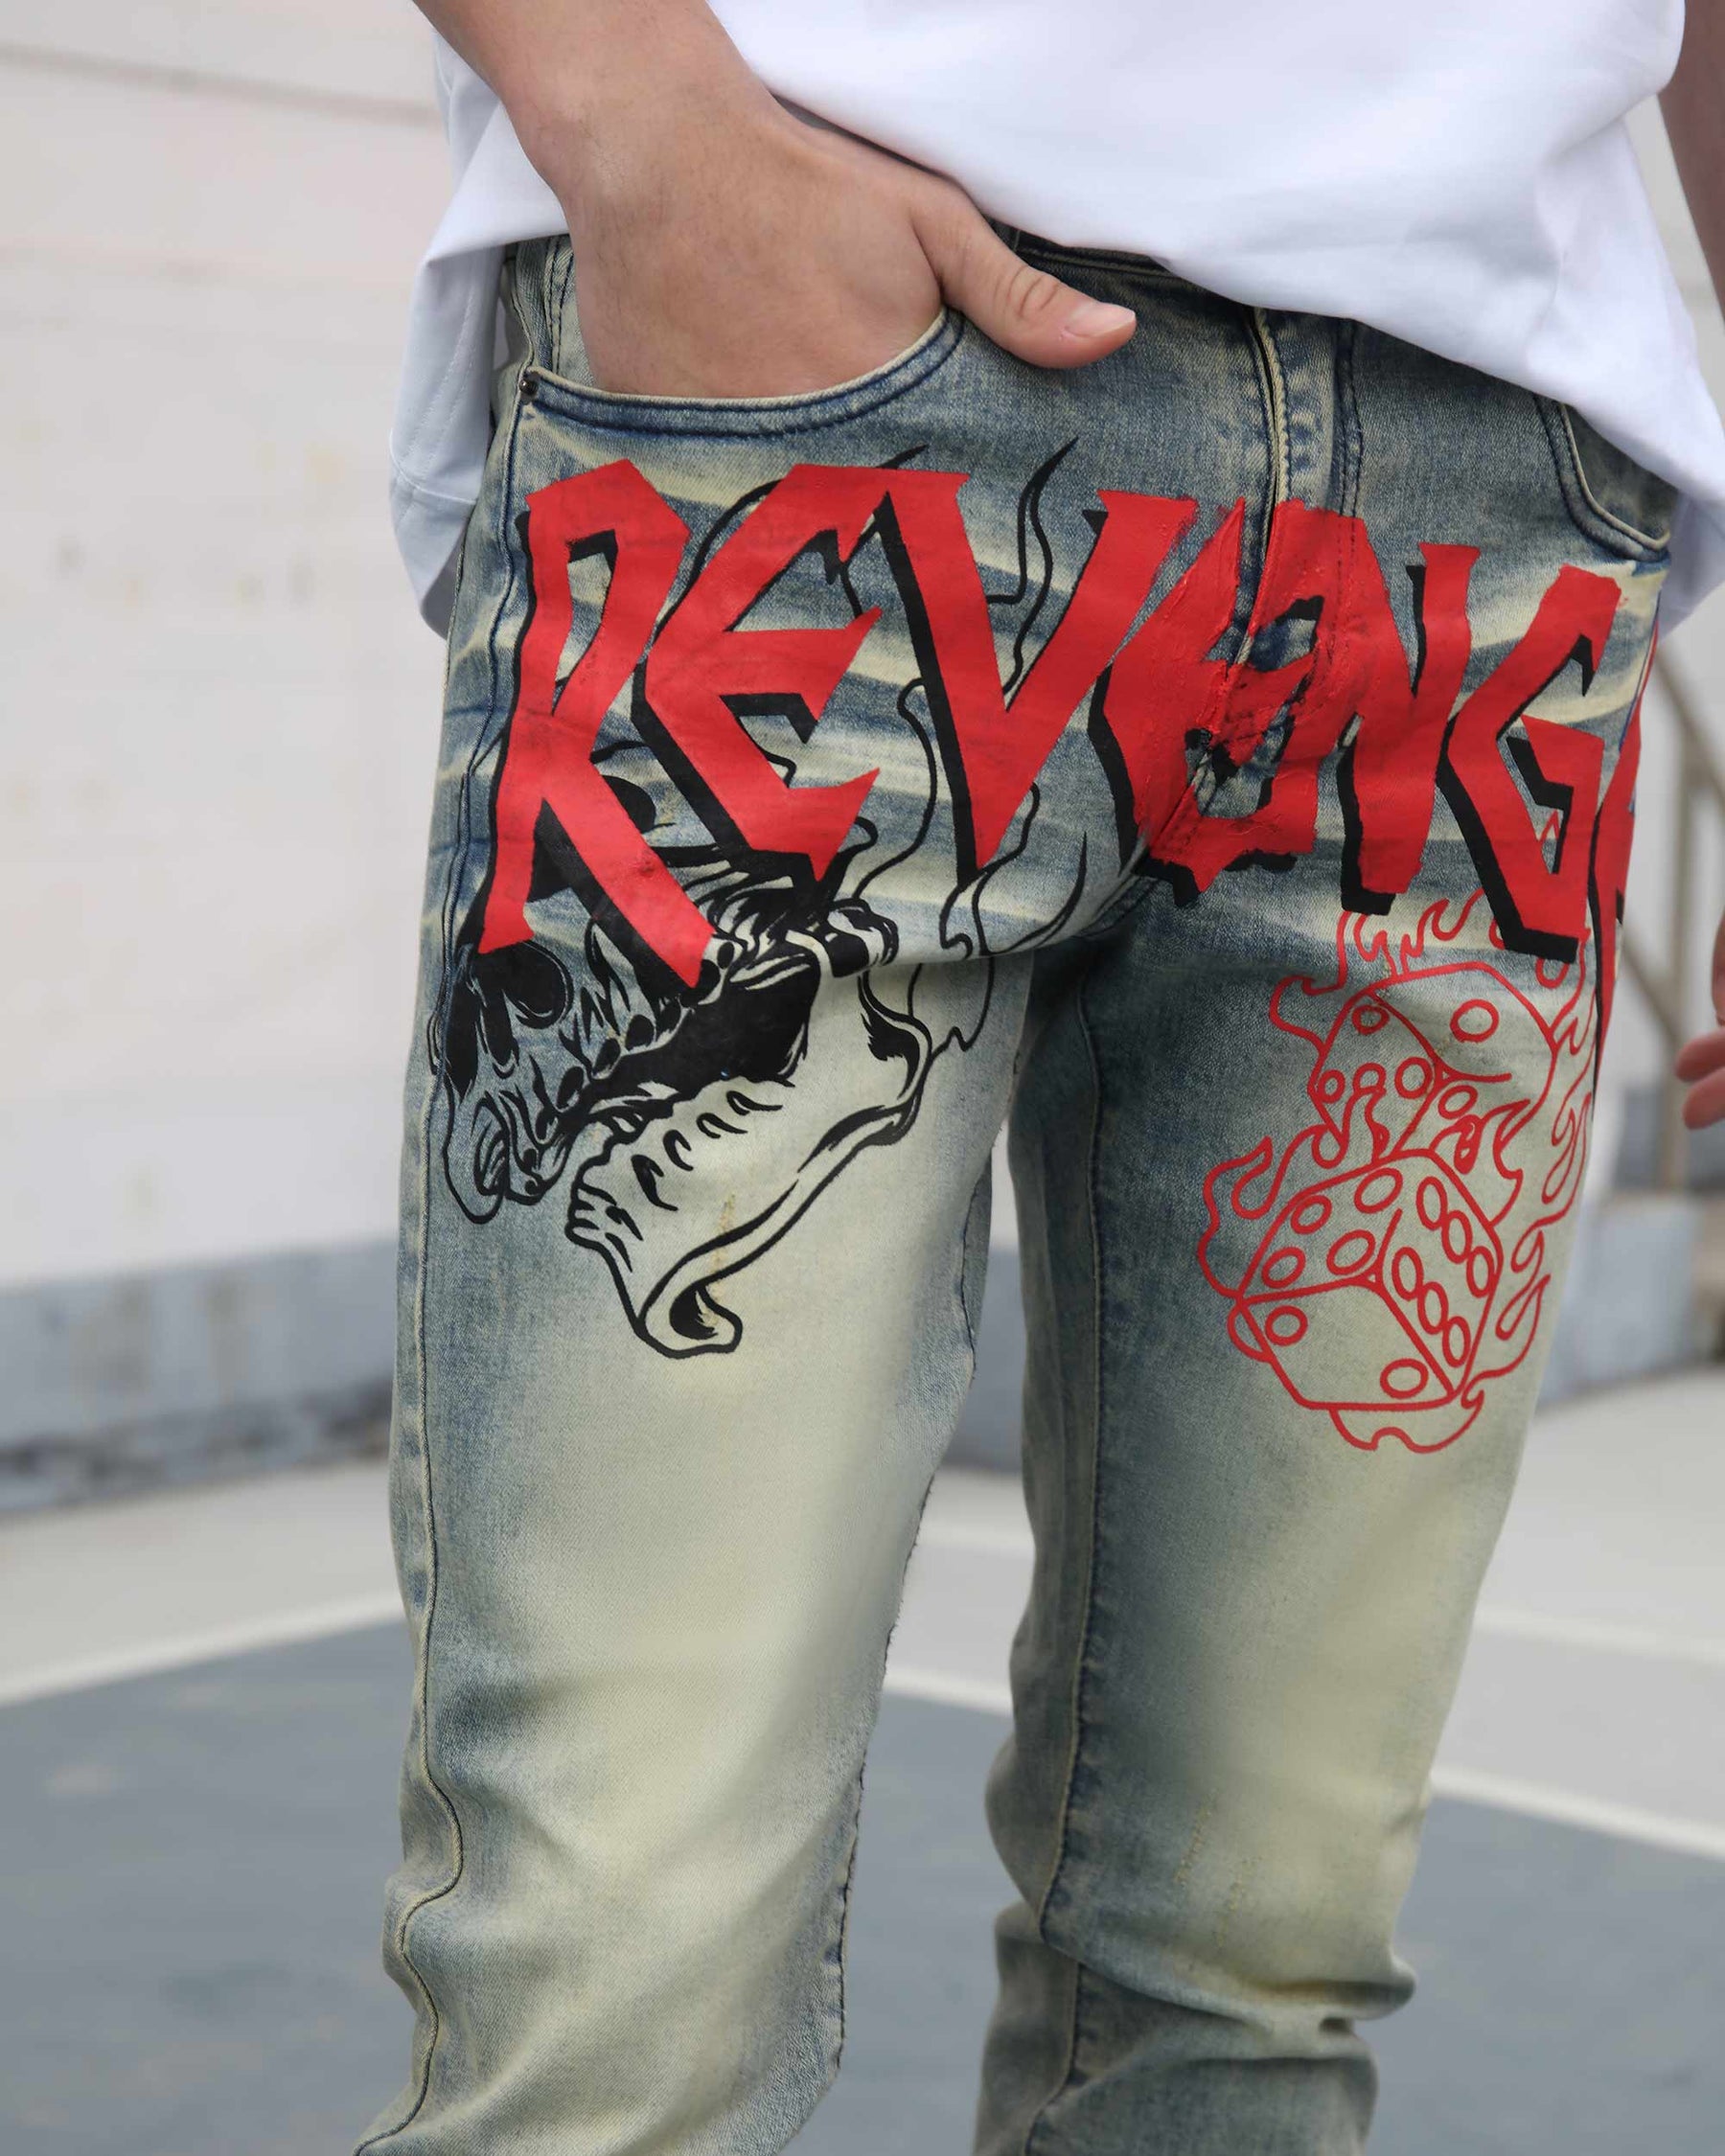 Vintage Slim Fit Straight Leg Distressed Blue Jeans with Painted Graffiti